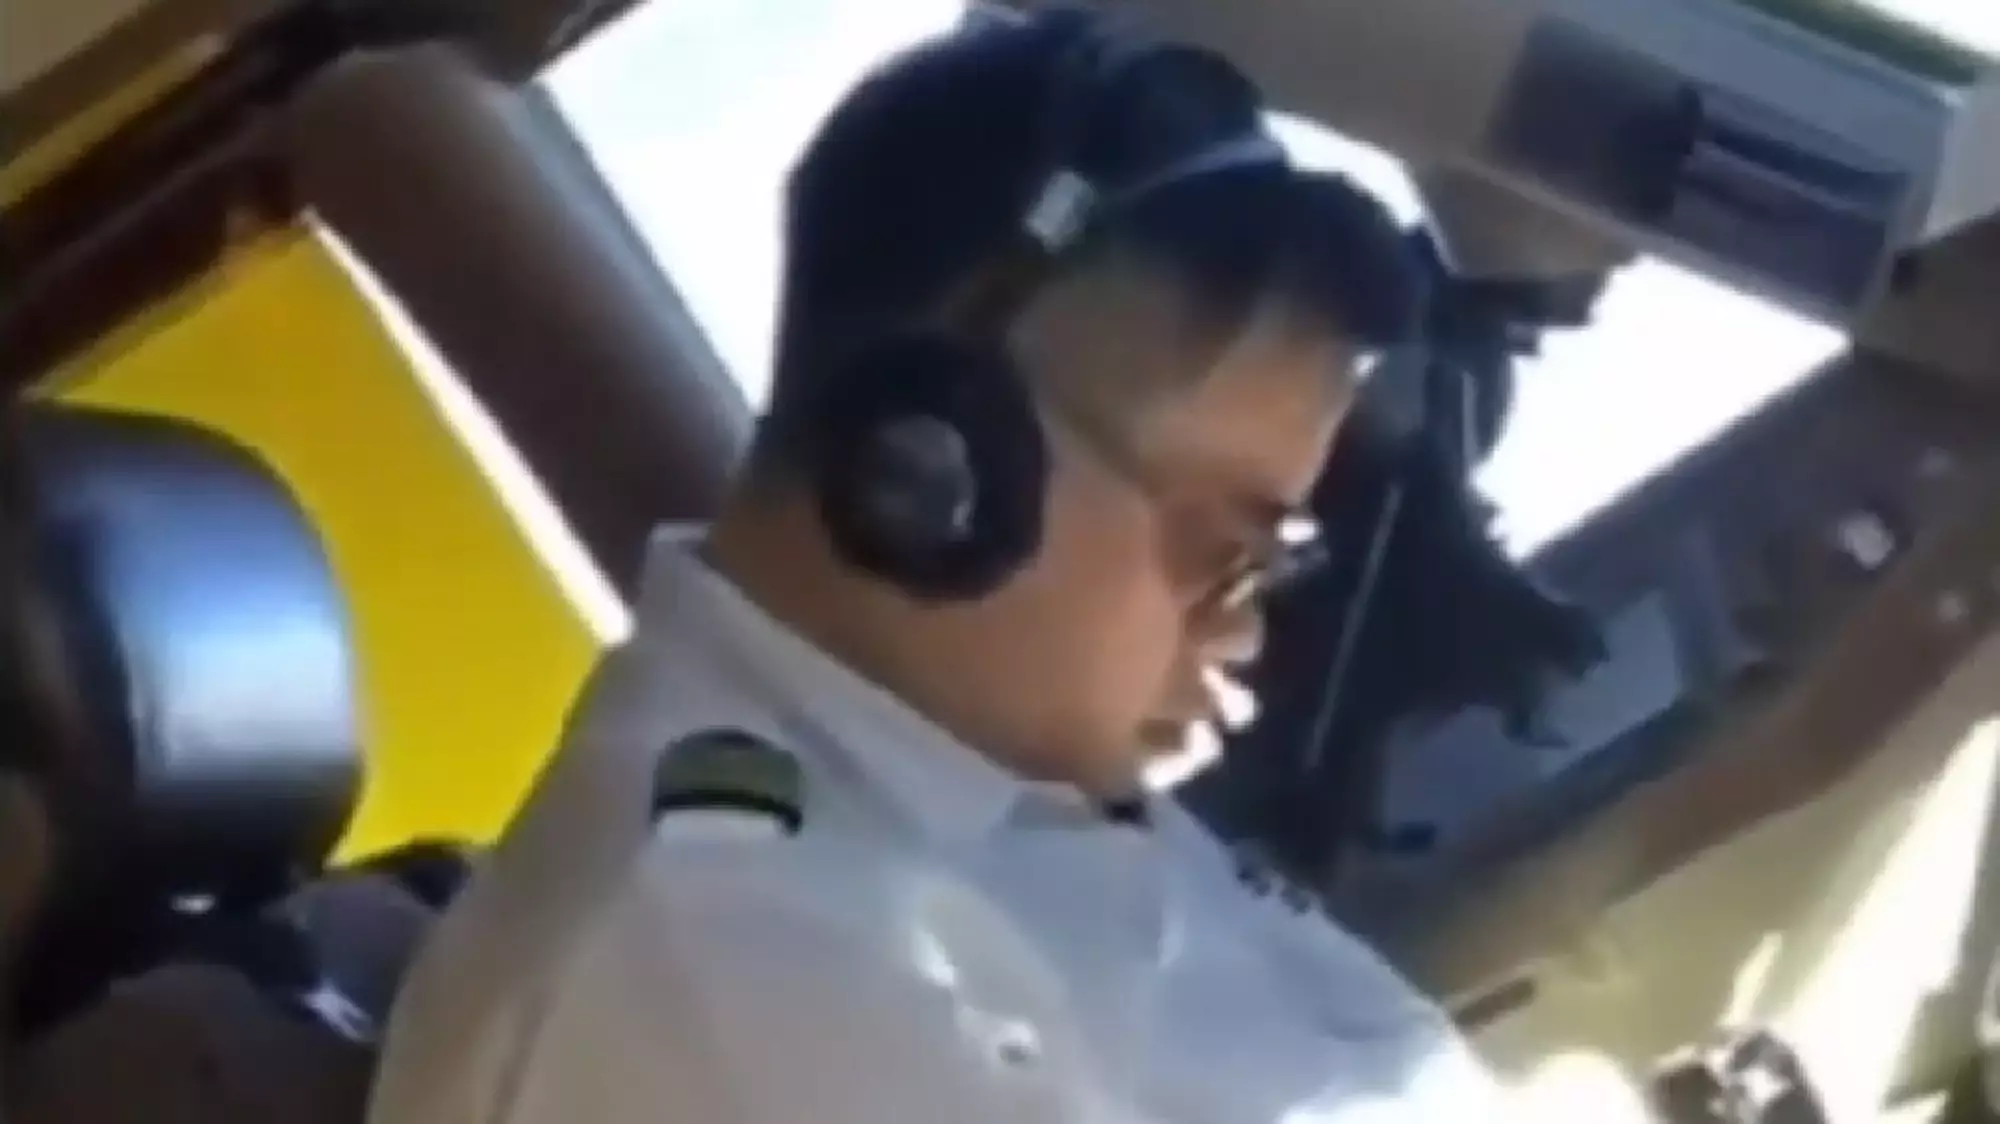 The China Airline pilot asleep in the cockpit.